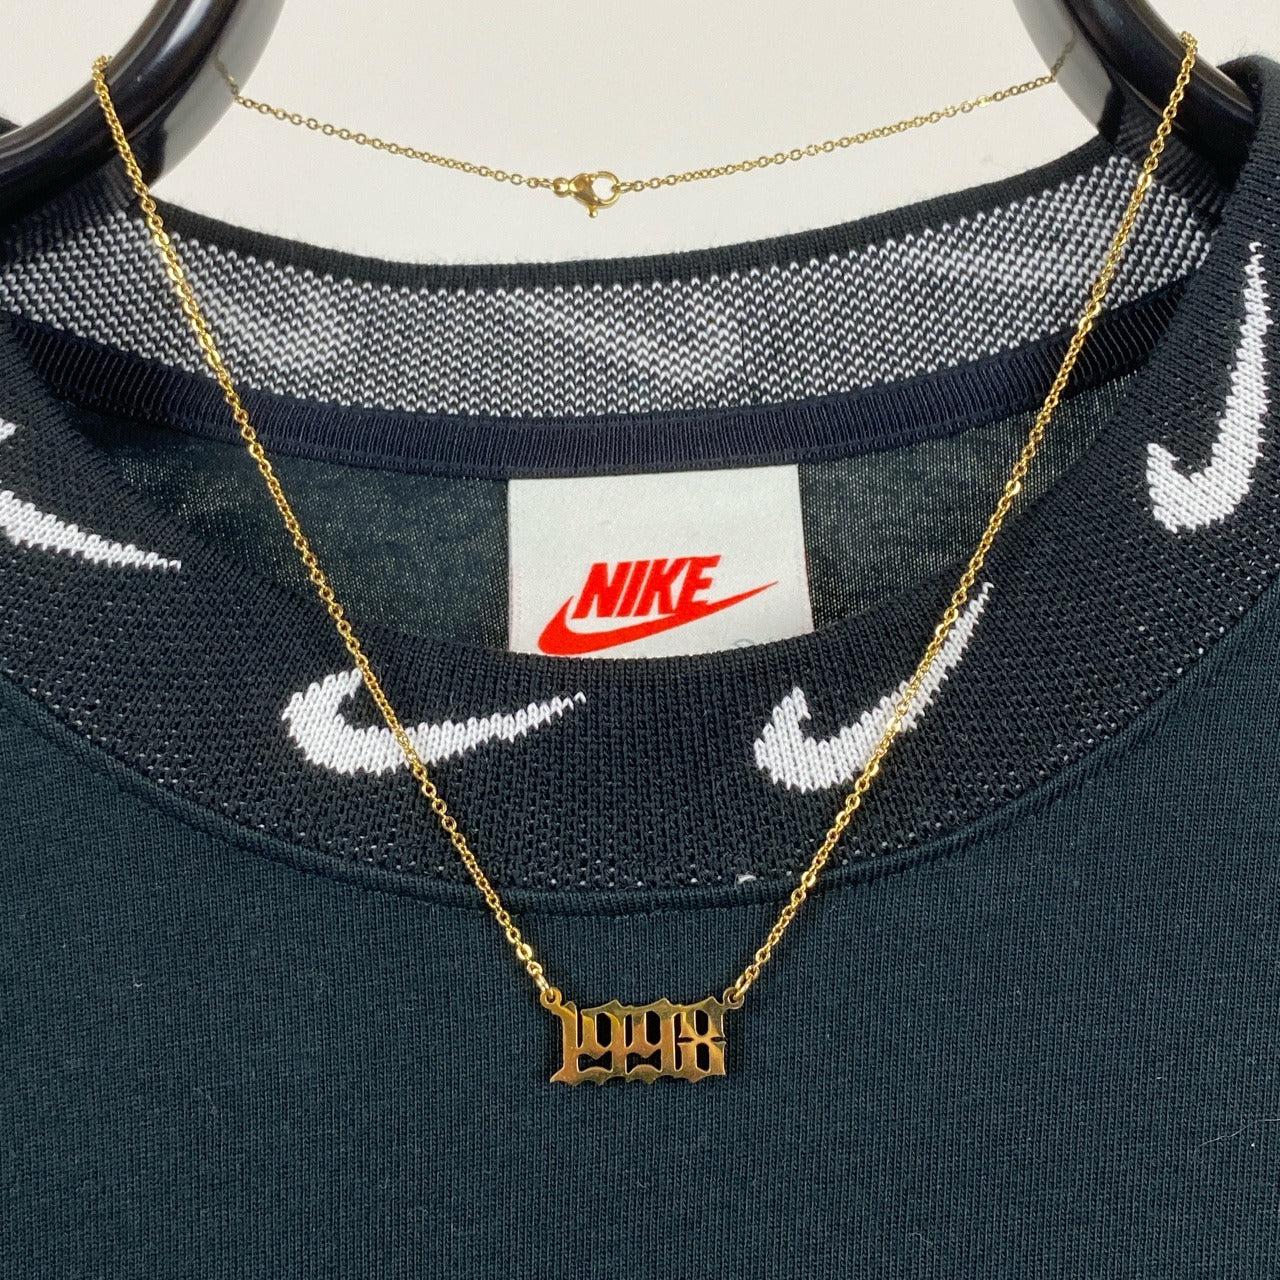 1998 Birth Year Necklace Chain Gold